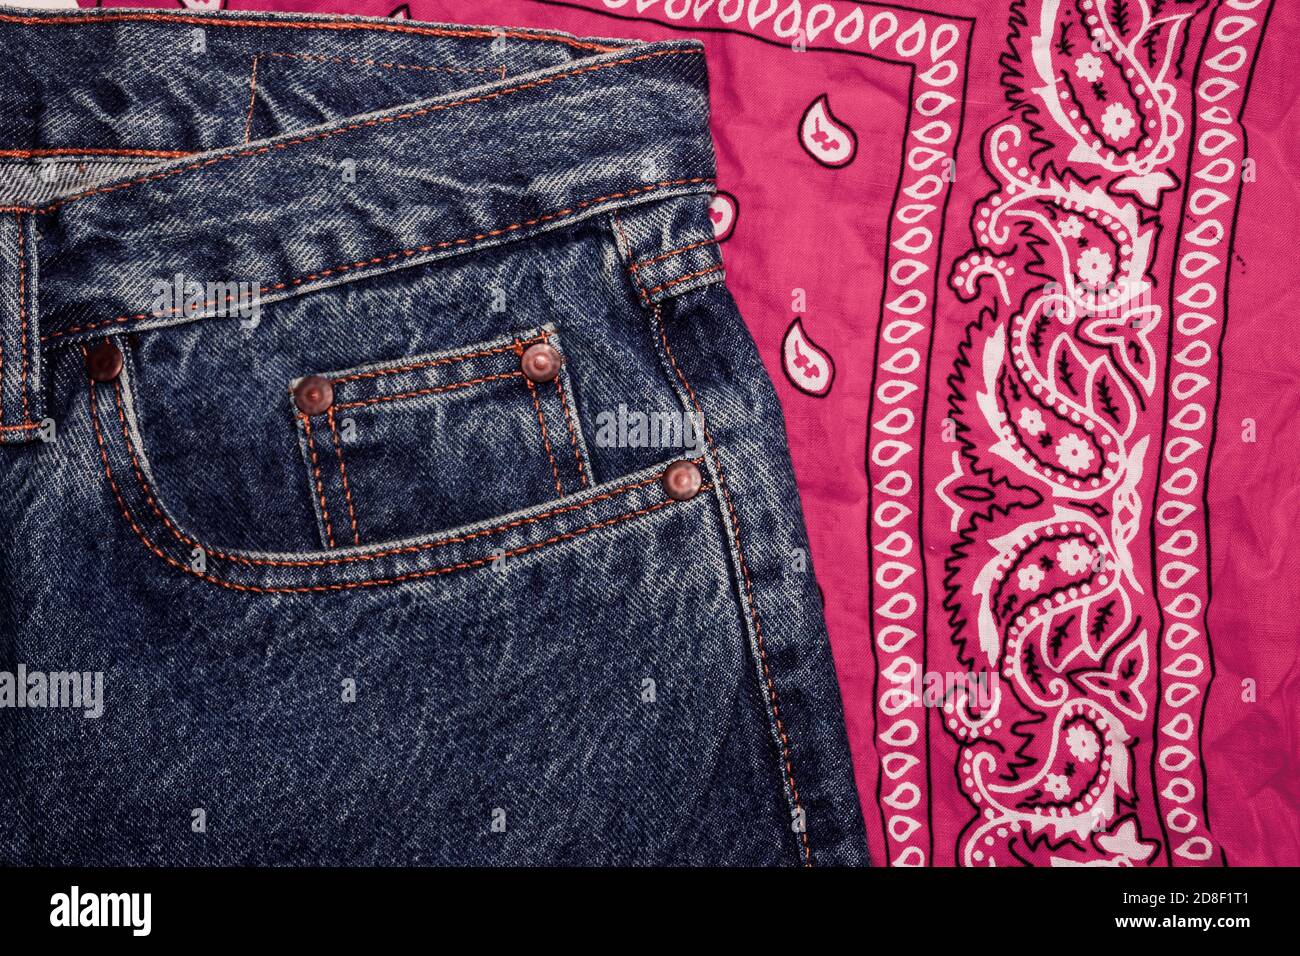 Classic jeans with five pockets close-up. Paisley patterned bandana,  classic red and white neckerchief, biker headscarf. Rough denim.  Fashionable casual style, hippie, western, boho. Clothing for the festival  Stock Photo - Alamy